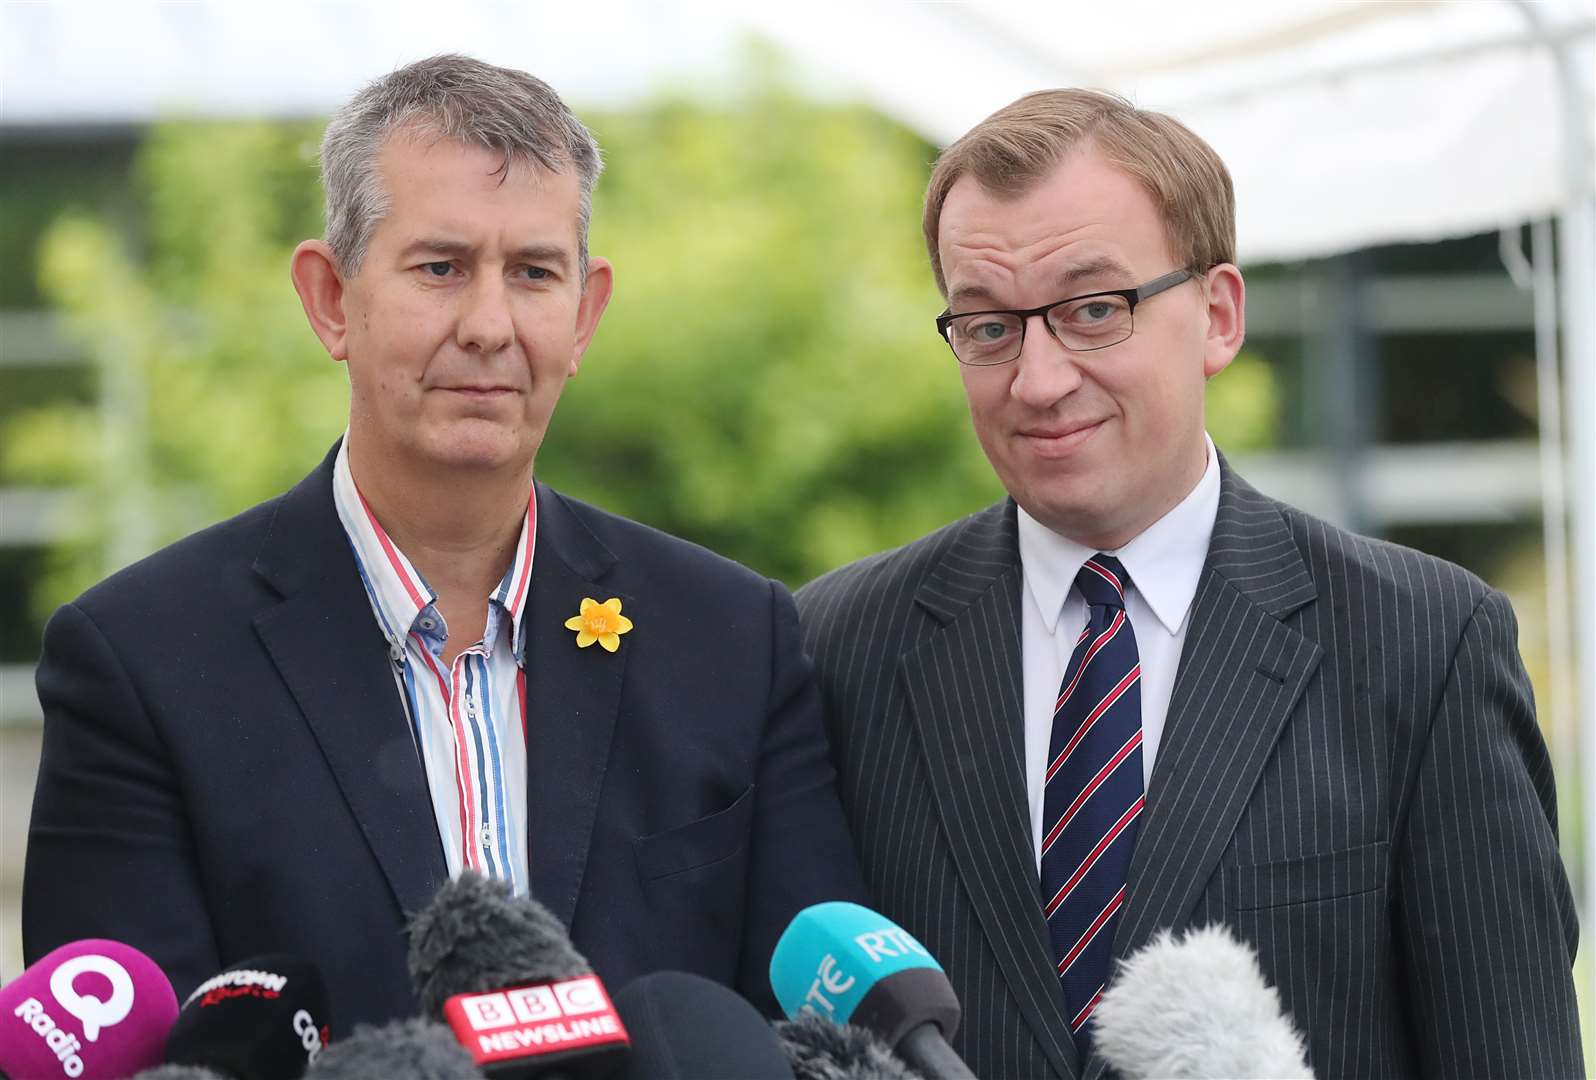 Christopher Stalford, right, with the DUP’s Edwin Poots in June 2017 (Niall Carson/PA)